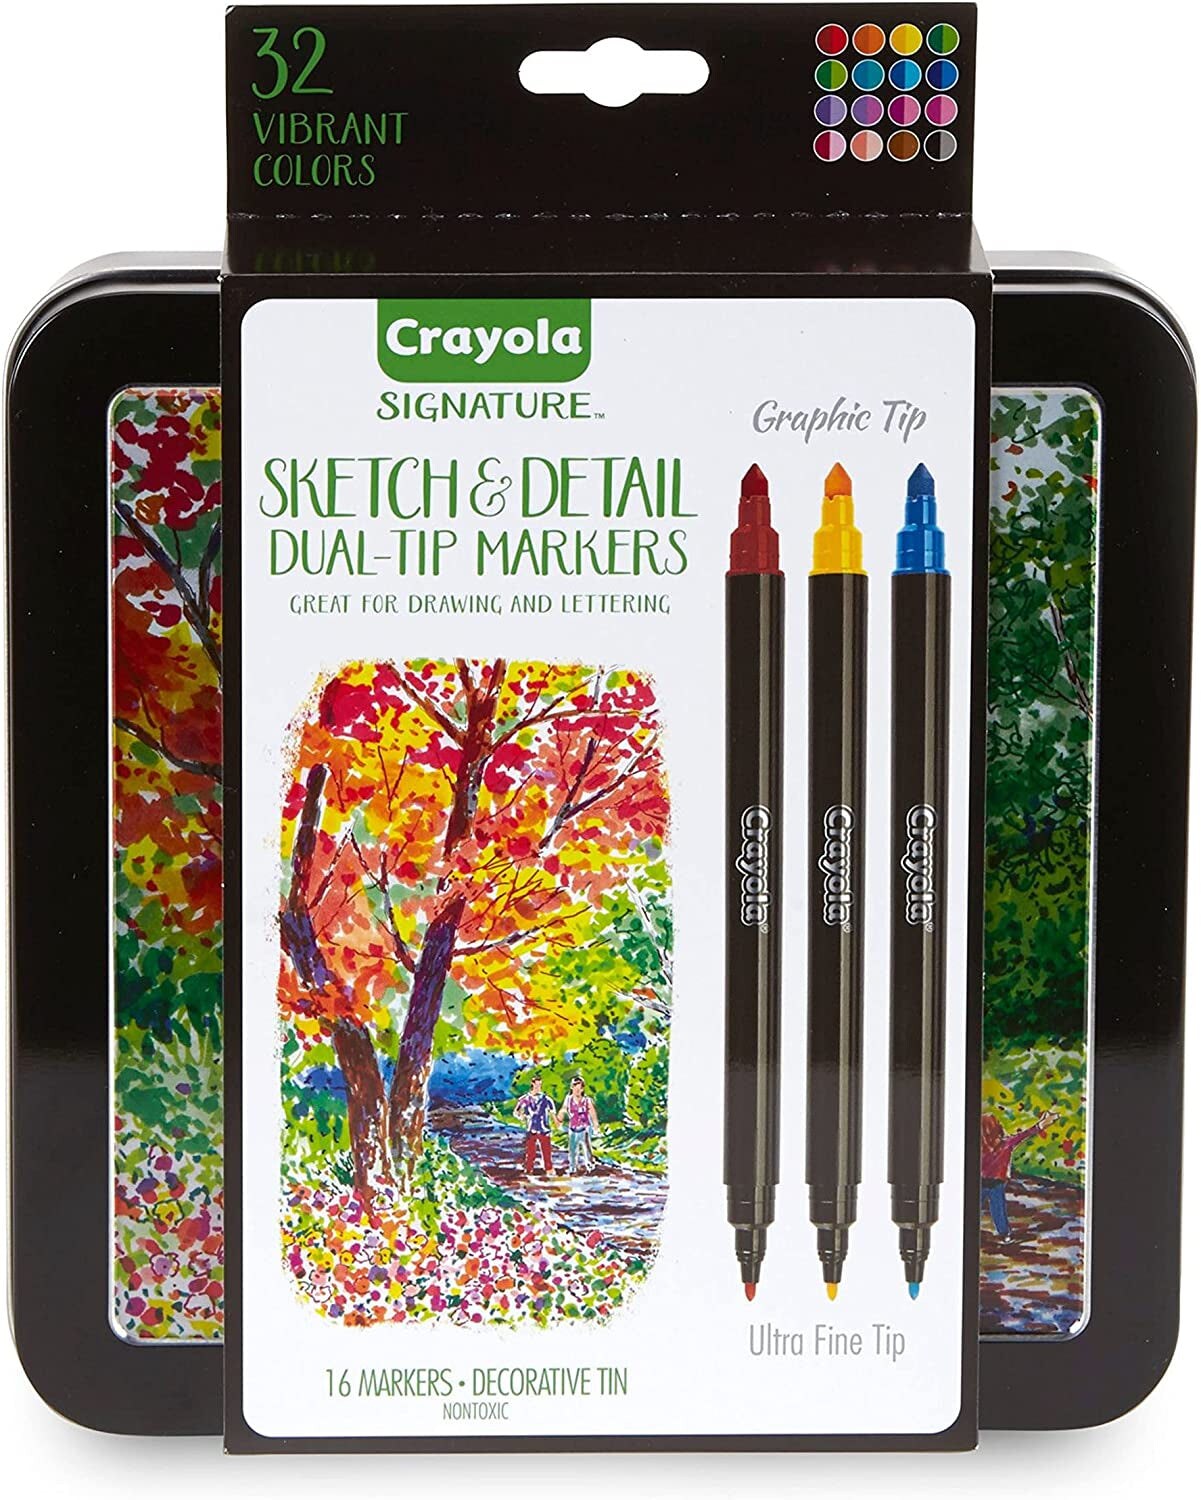 Crayola Brush & Detail Dual Tip Marker Set (32ct), Adult Coloring Markers,  Gifts for Teens & Adults